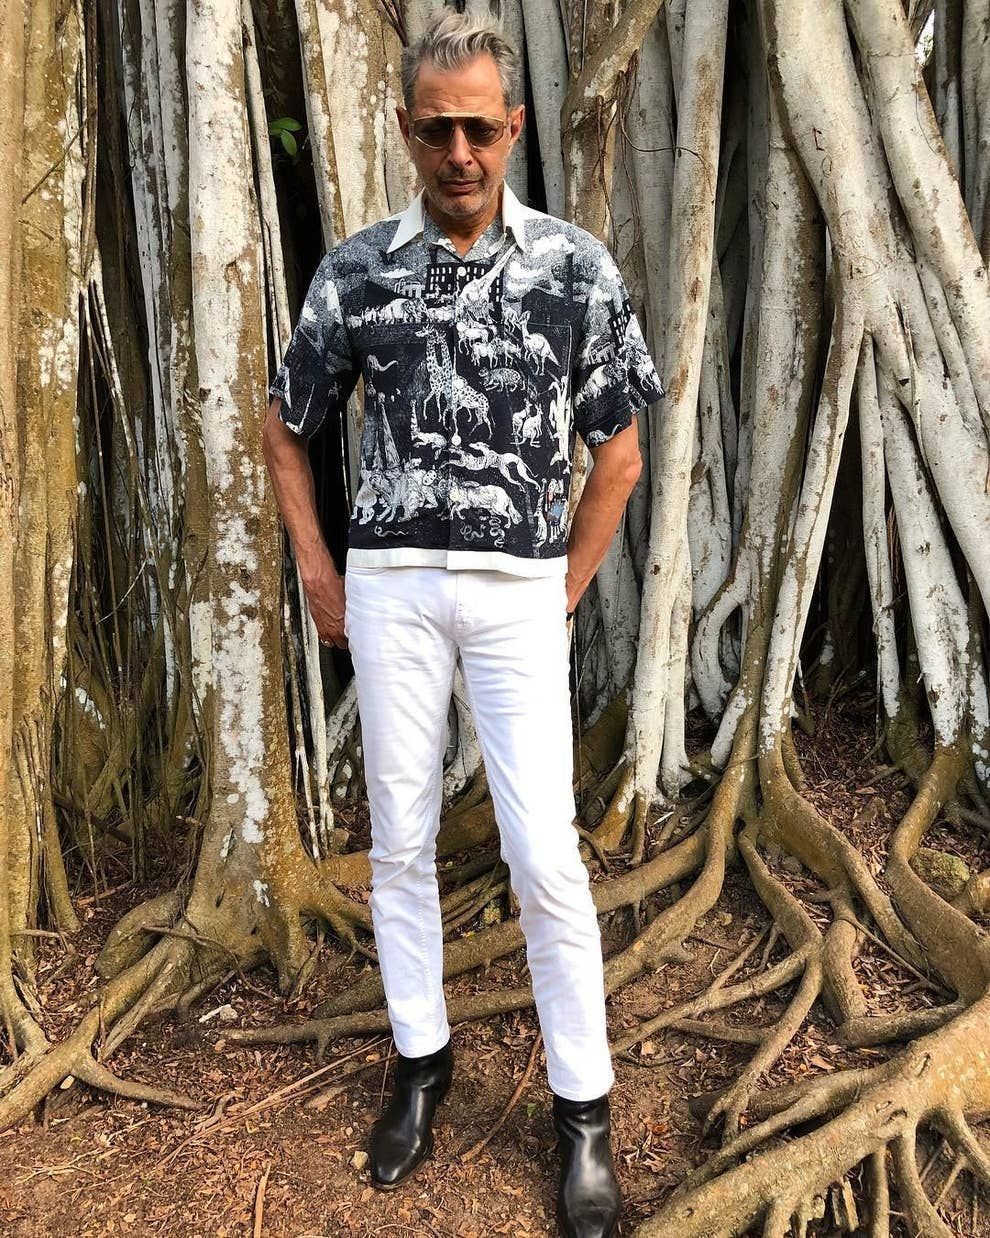 17 Pictures Of Jeff Goldblum As The Printed-Shirt Daddy Of Your Dreams - 17 Pictures Of Jeff Goldblum As The Printed-Shirt Daddy Of Your Dreams -   17 mens style Icons ideas